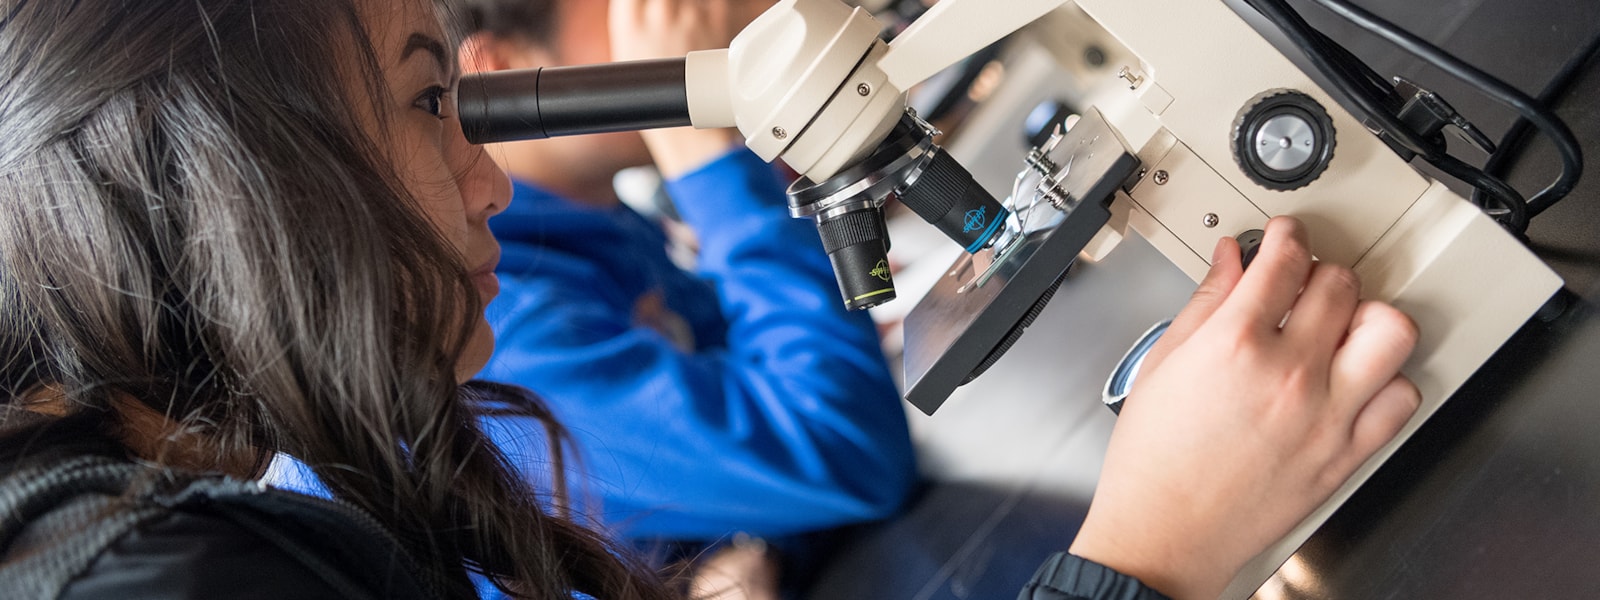 High school student looks through a microscope in a science class.